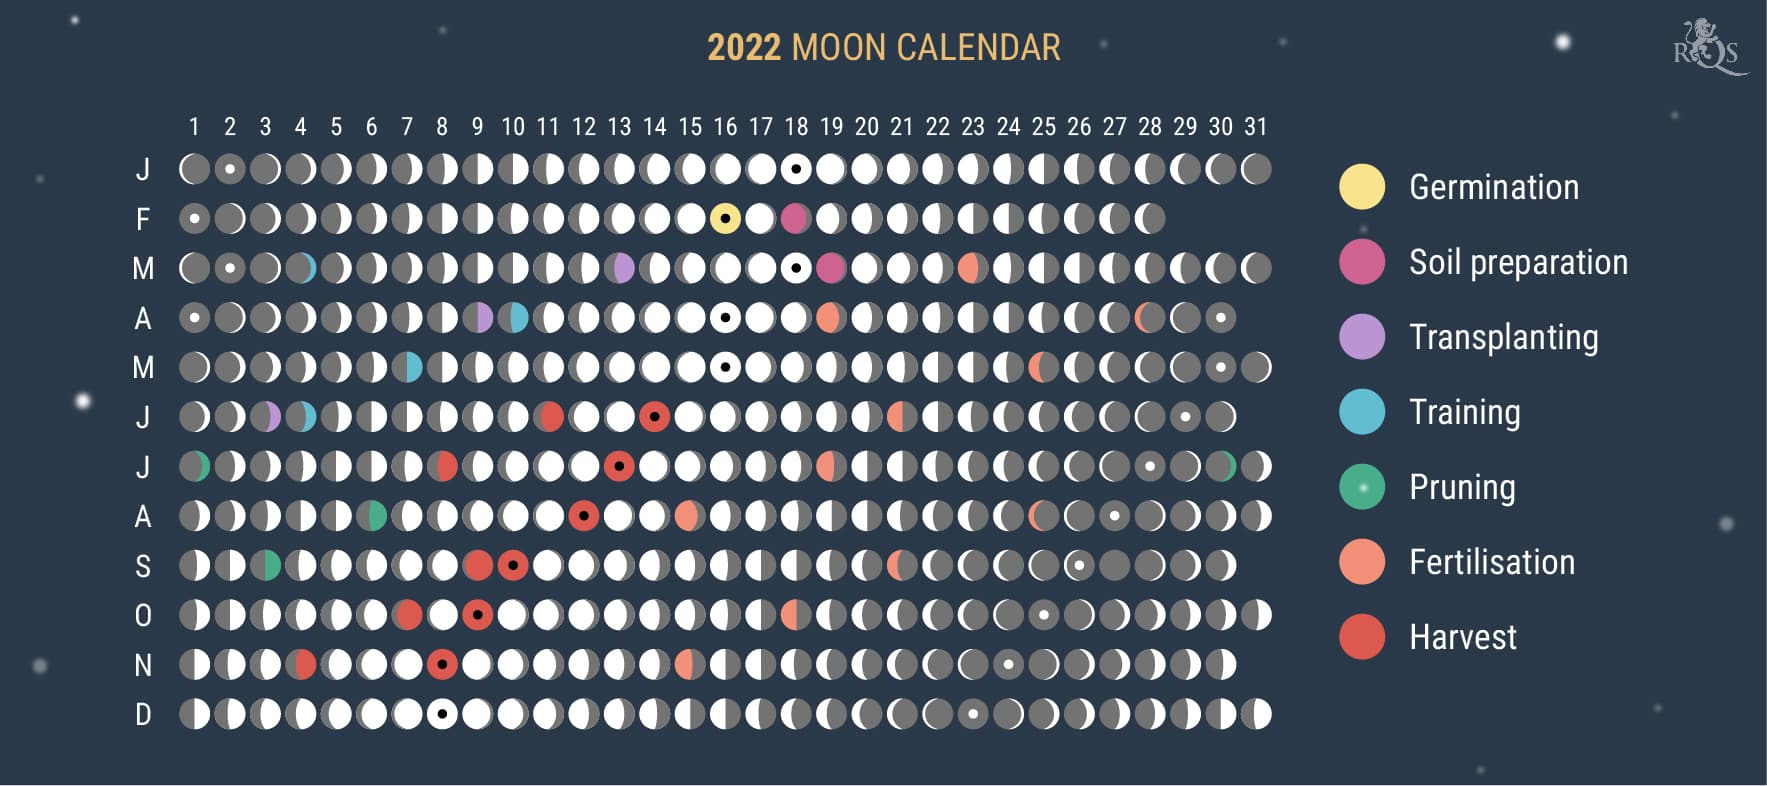 How to Use the 2022 Lunar Calendar During the Growing Season